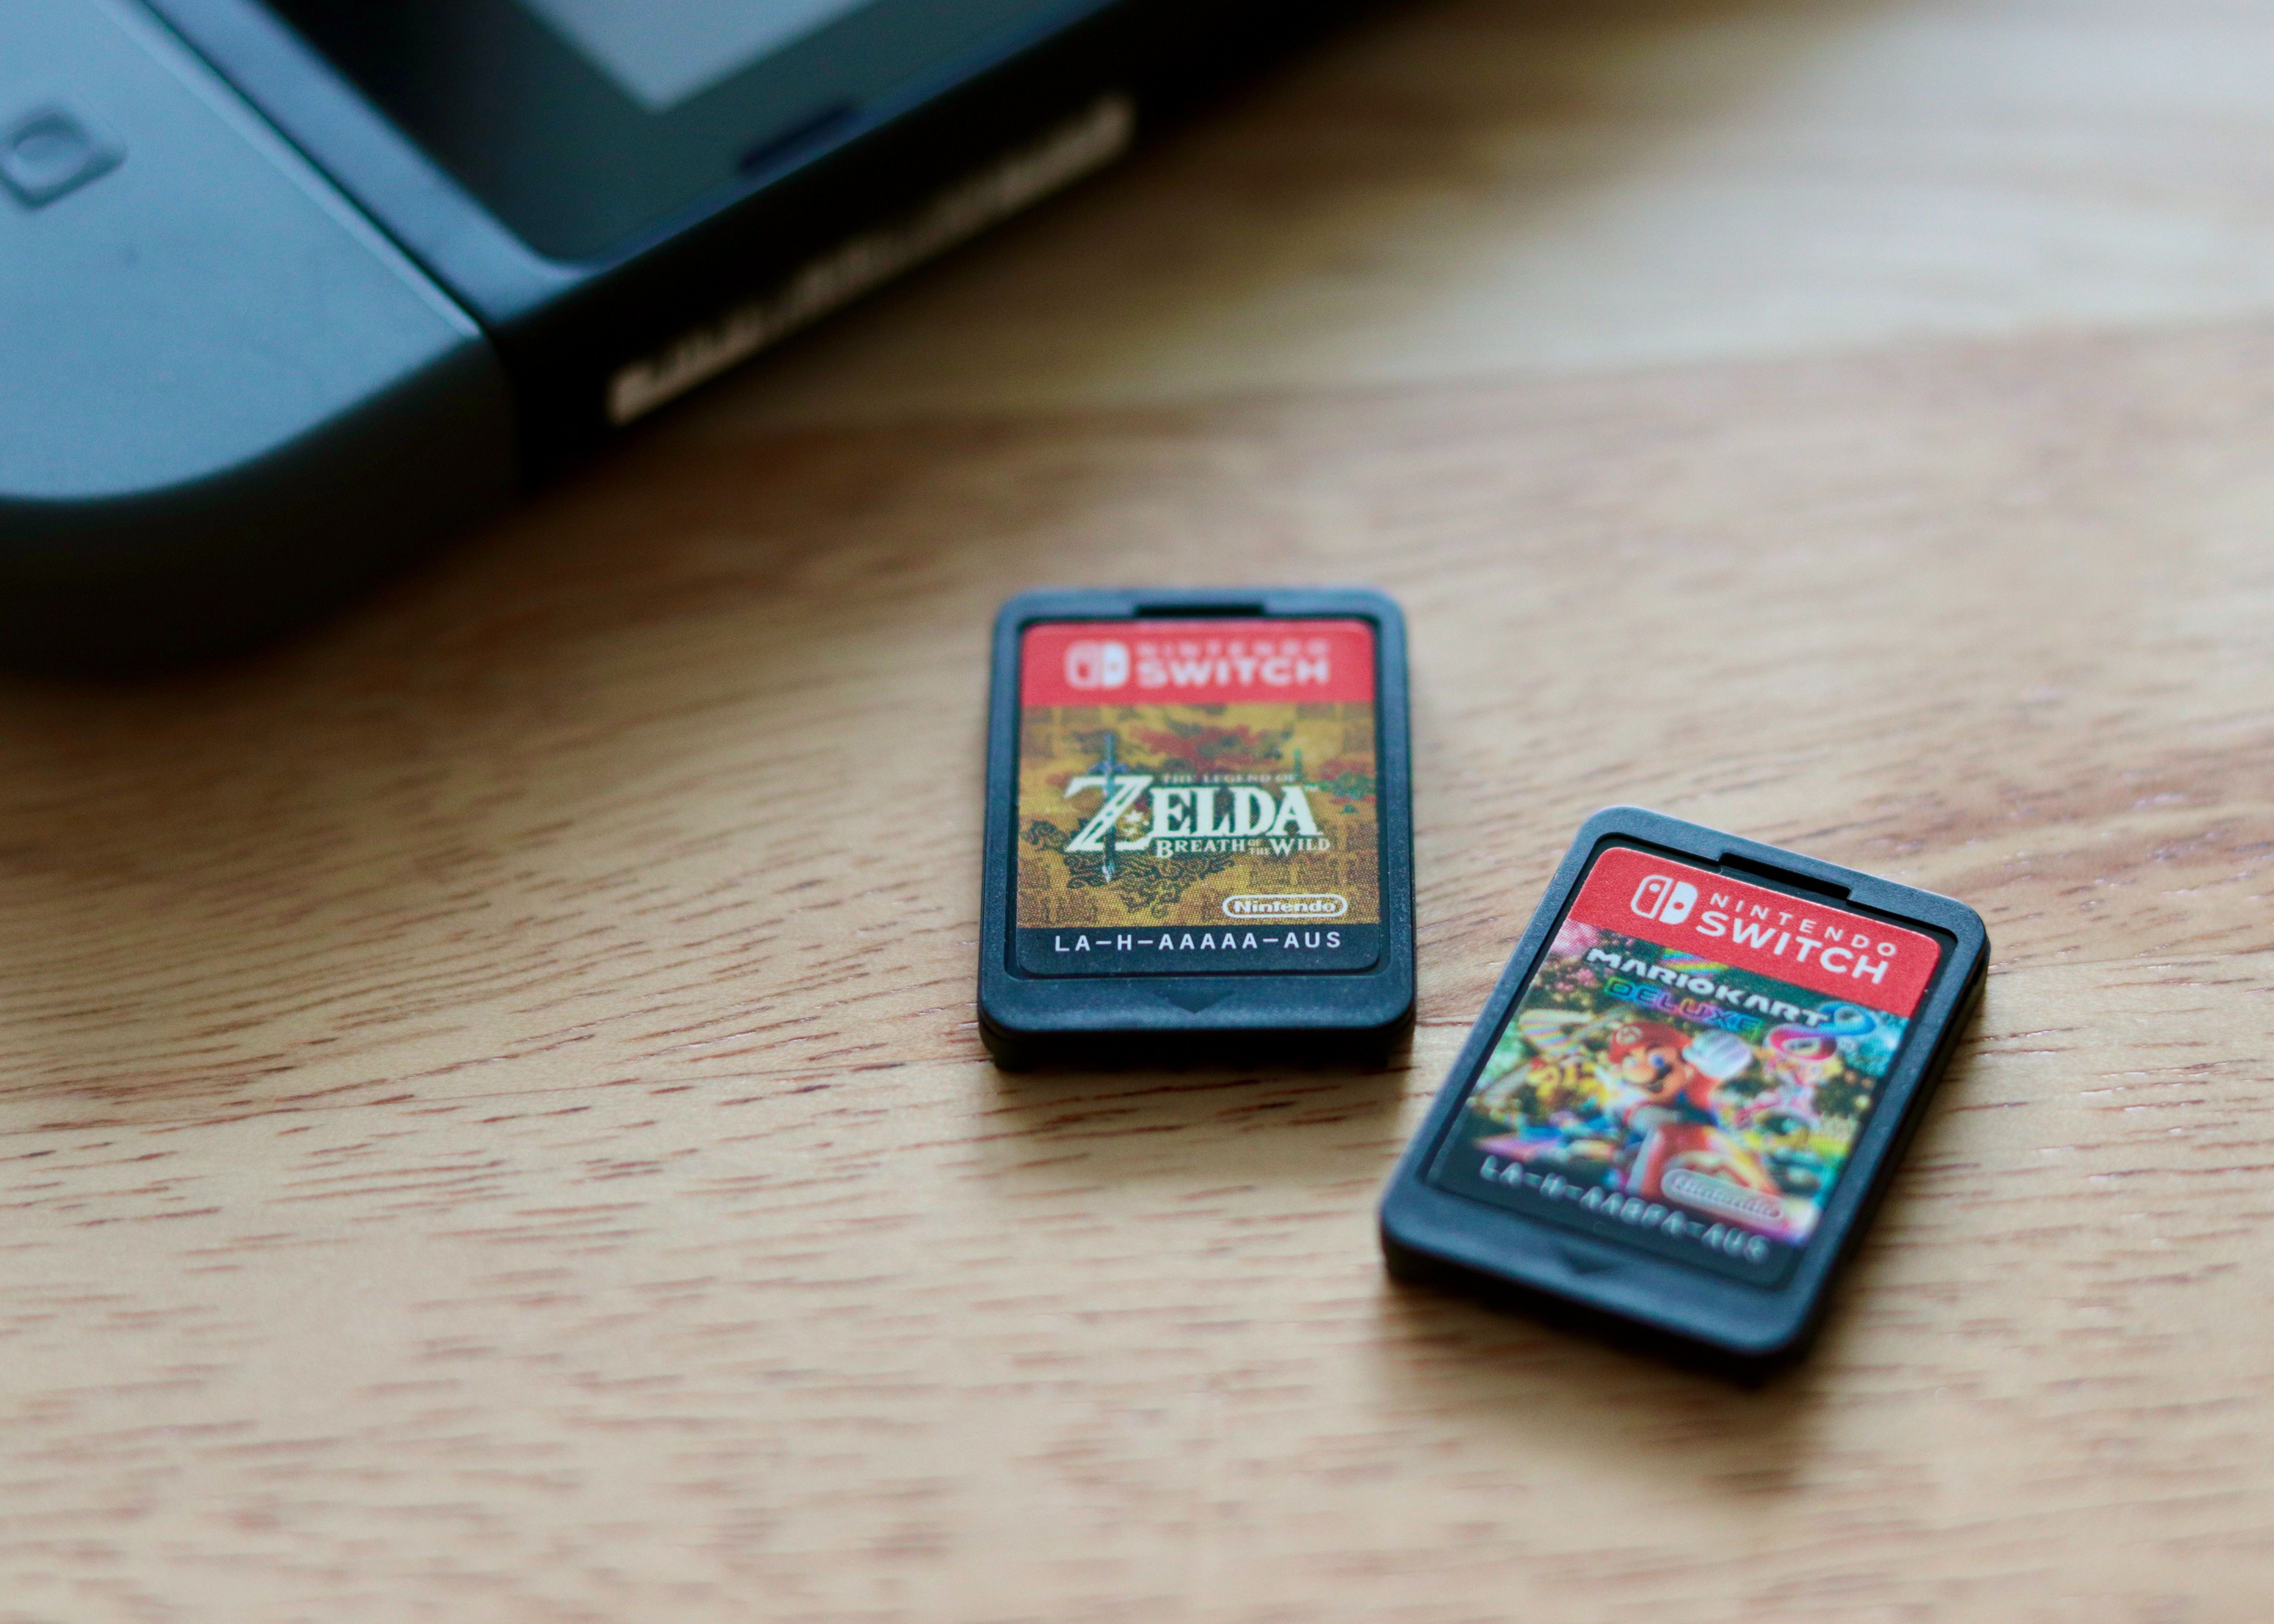 You can sell Nintendo Switch game cartridges second hand